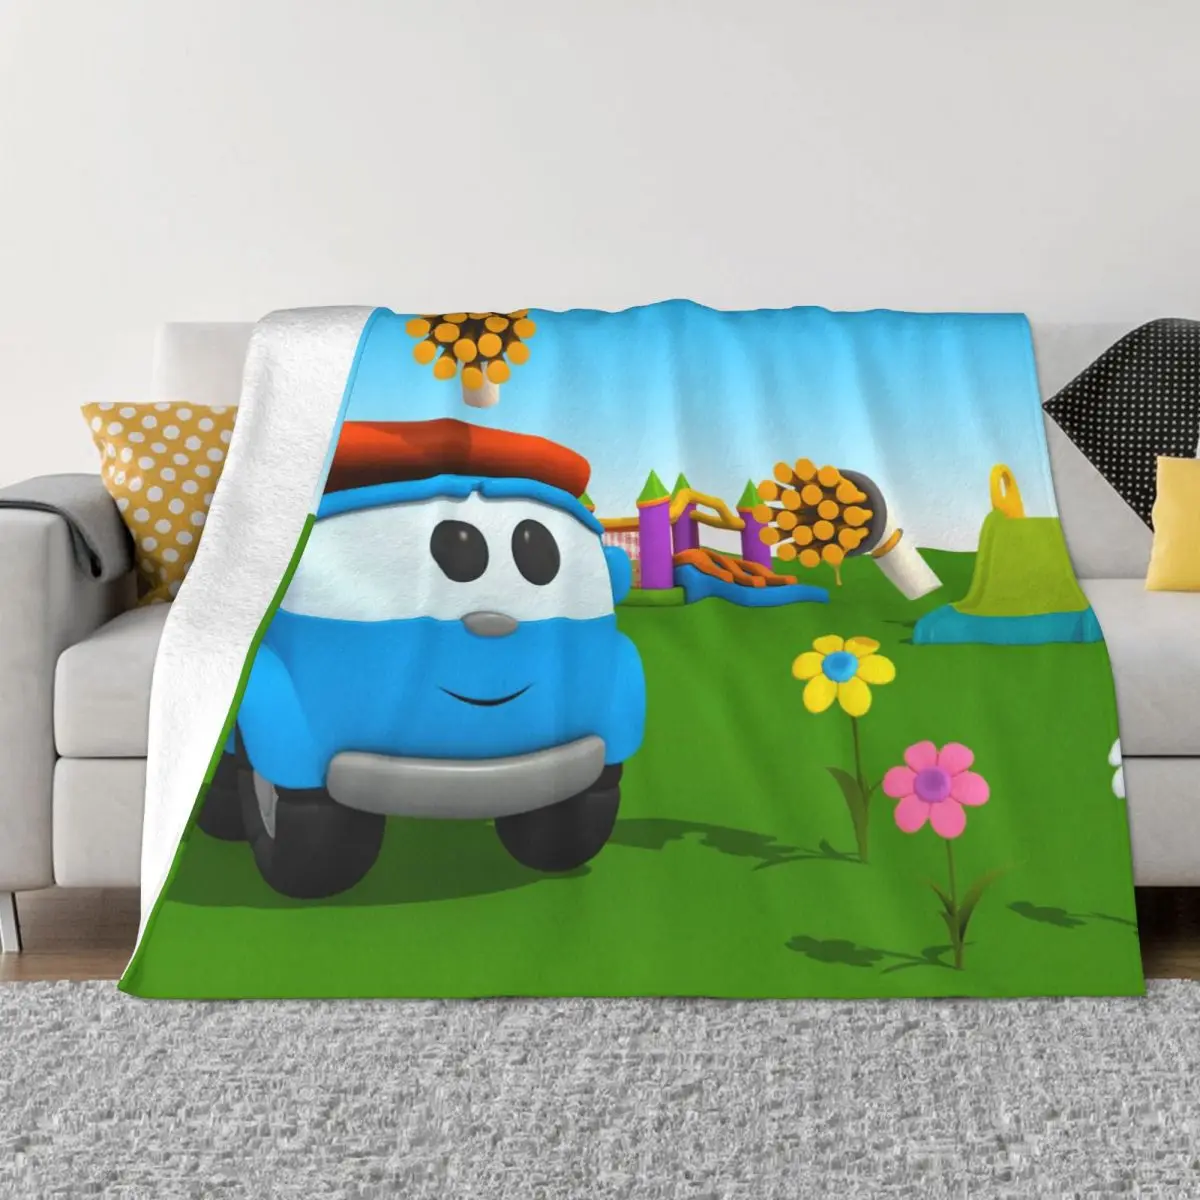 

TV Movies Shows Leo The Truck Blanket Flannel All Season Cartoon Ultra-Soft Throw Blankets for Bedding Couch Bedding Throws